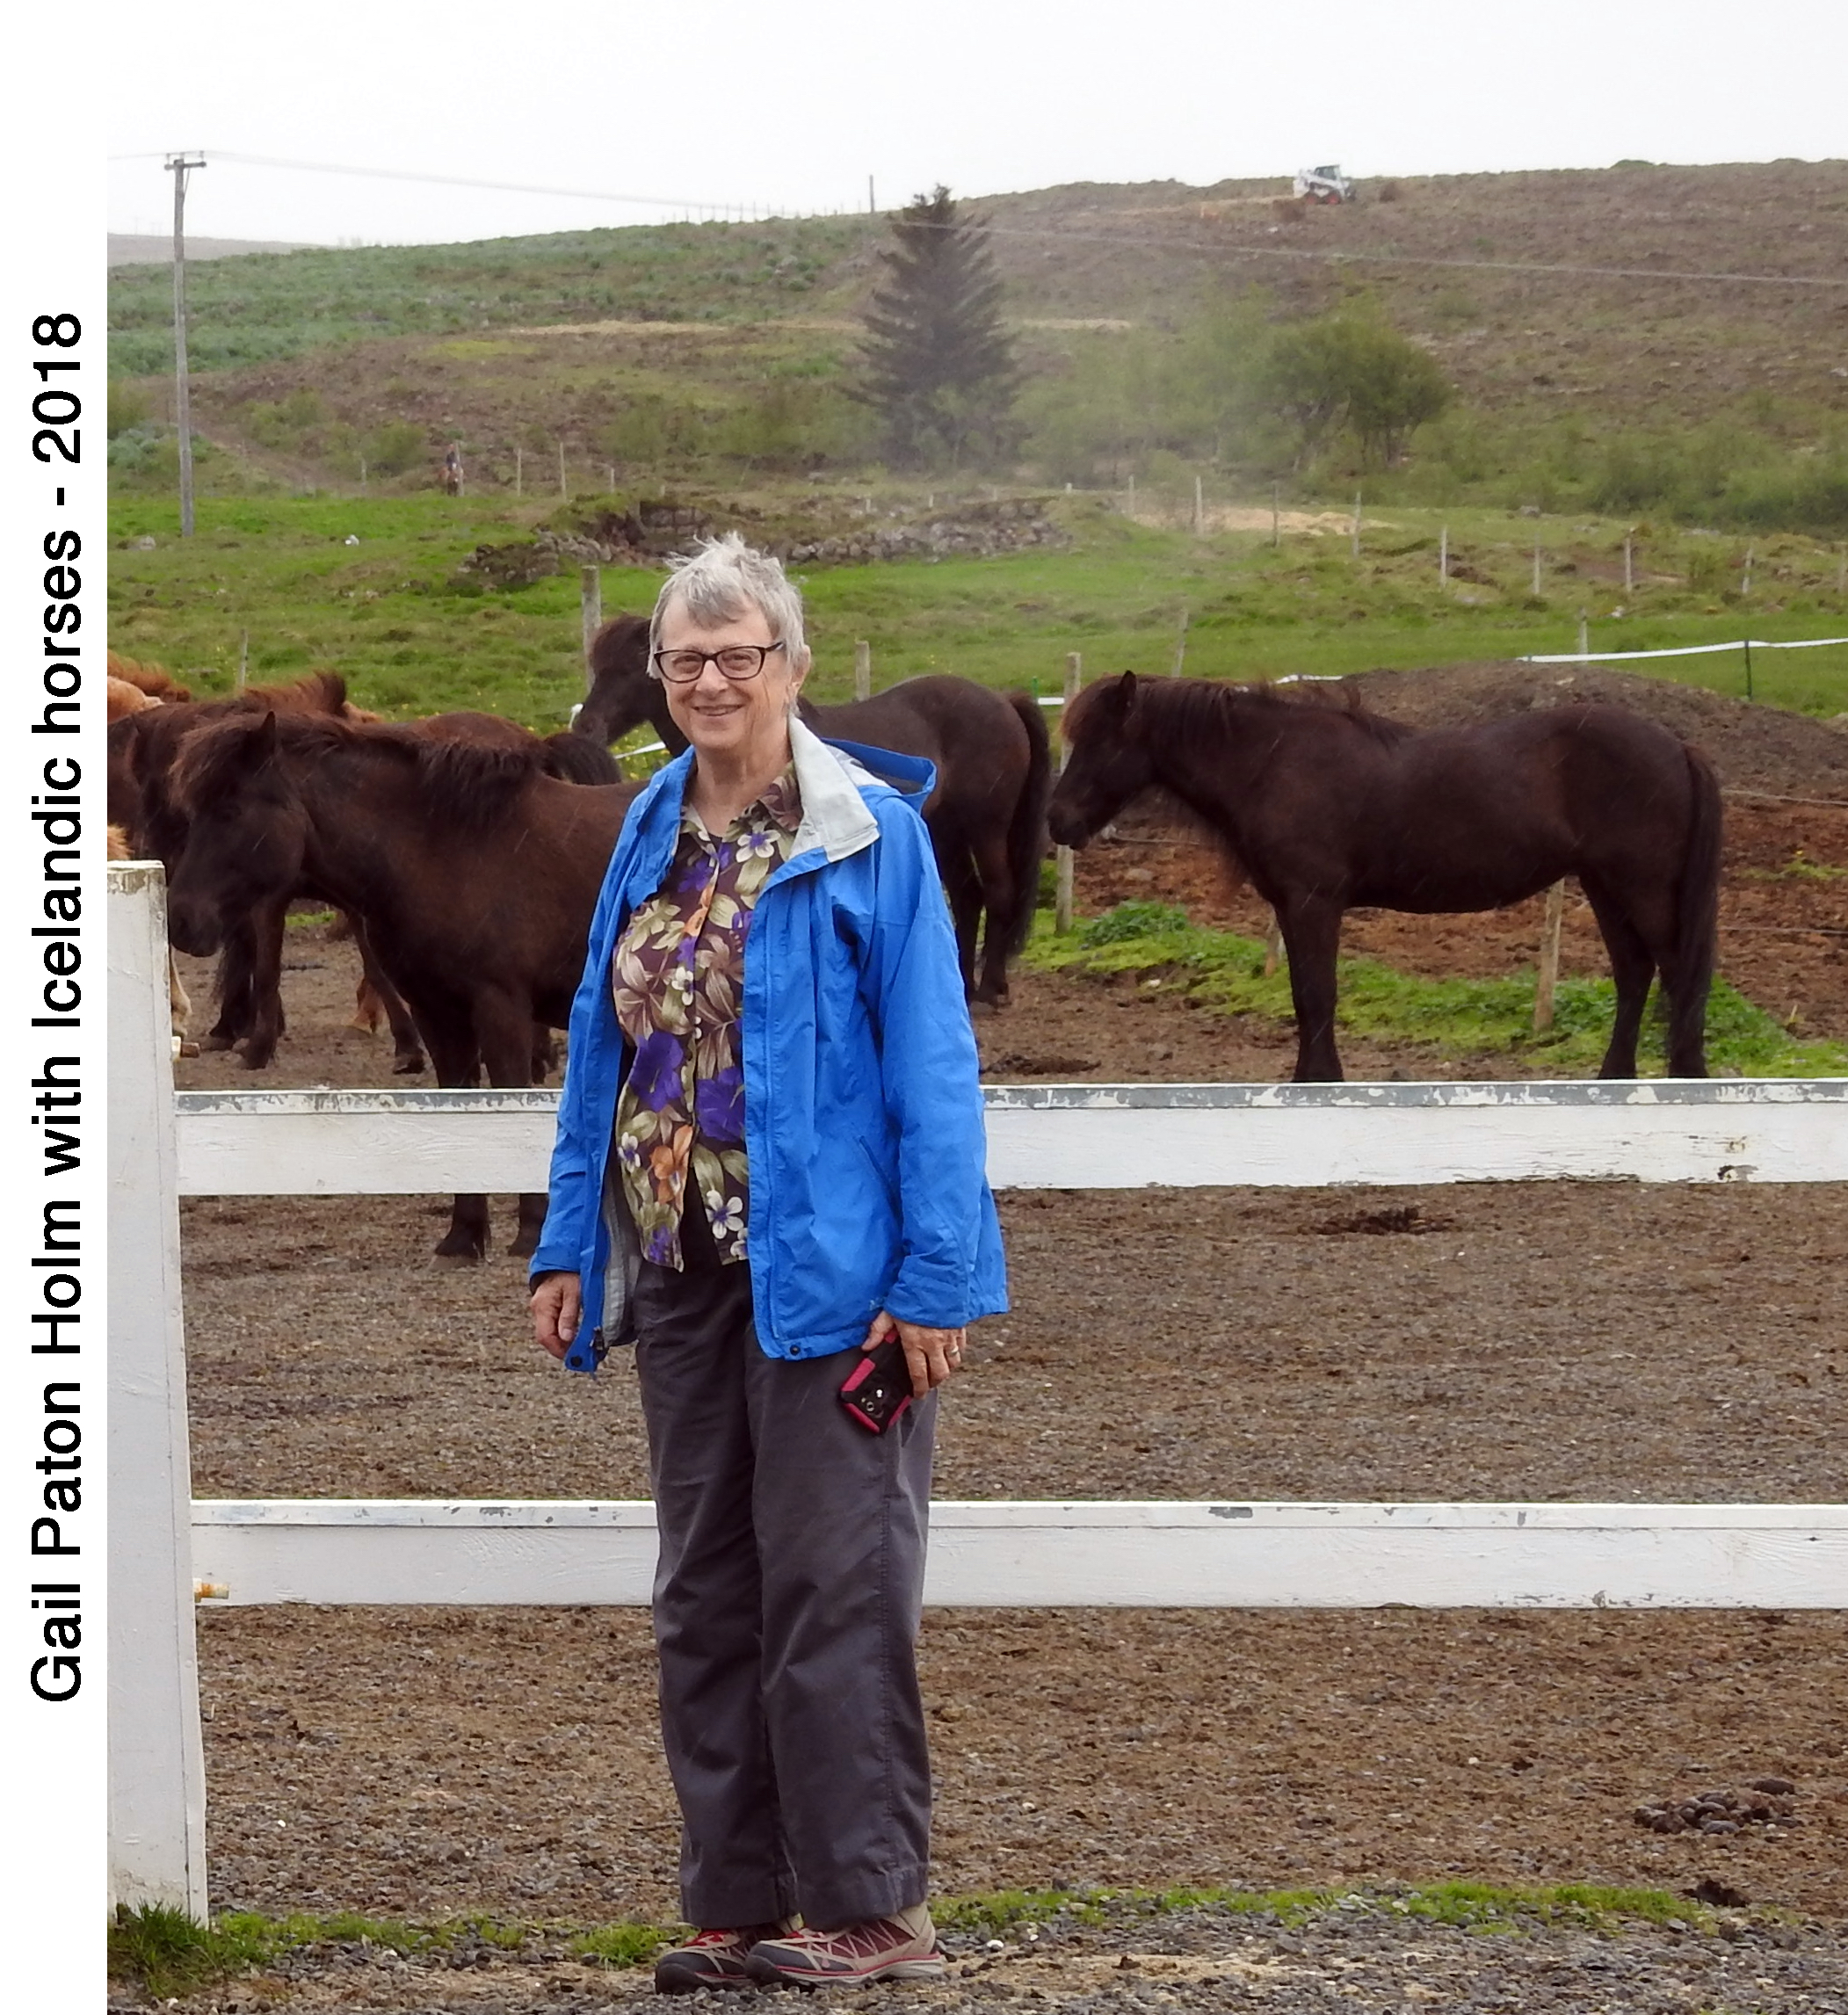 Gail Holm standing by Icelandic horses